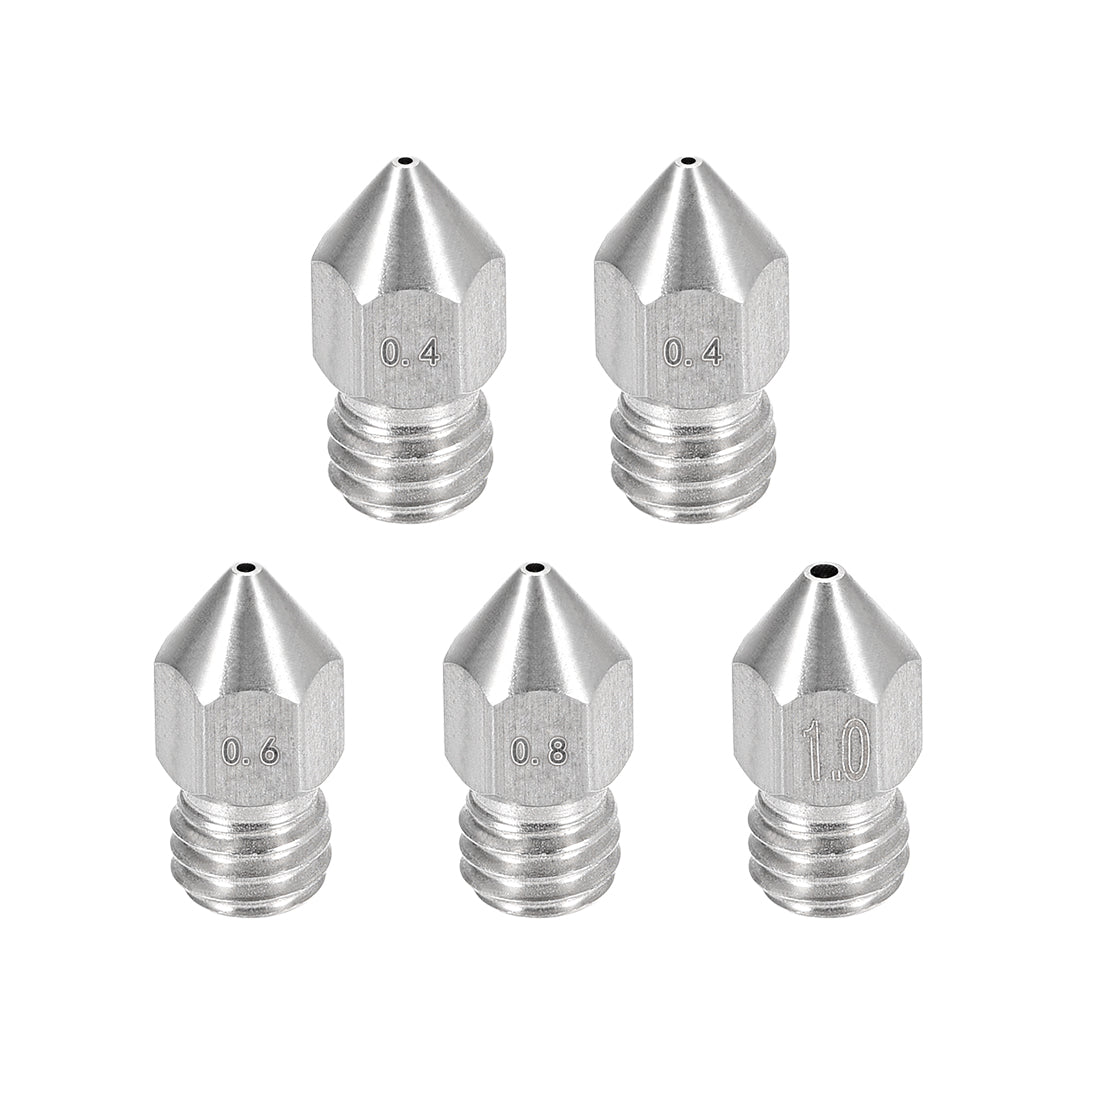 uxcell Uxcell 3D Printer Nozzle Fit for MK8,for 1.75mm Filament Stainless Steel,0.4mm - 1mm Total 5pcs